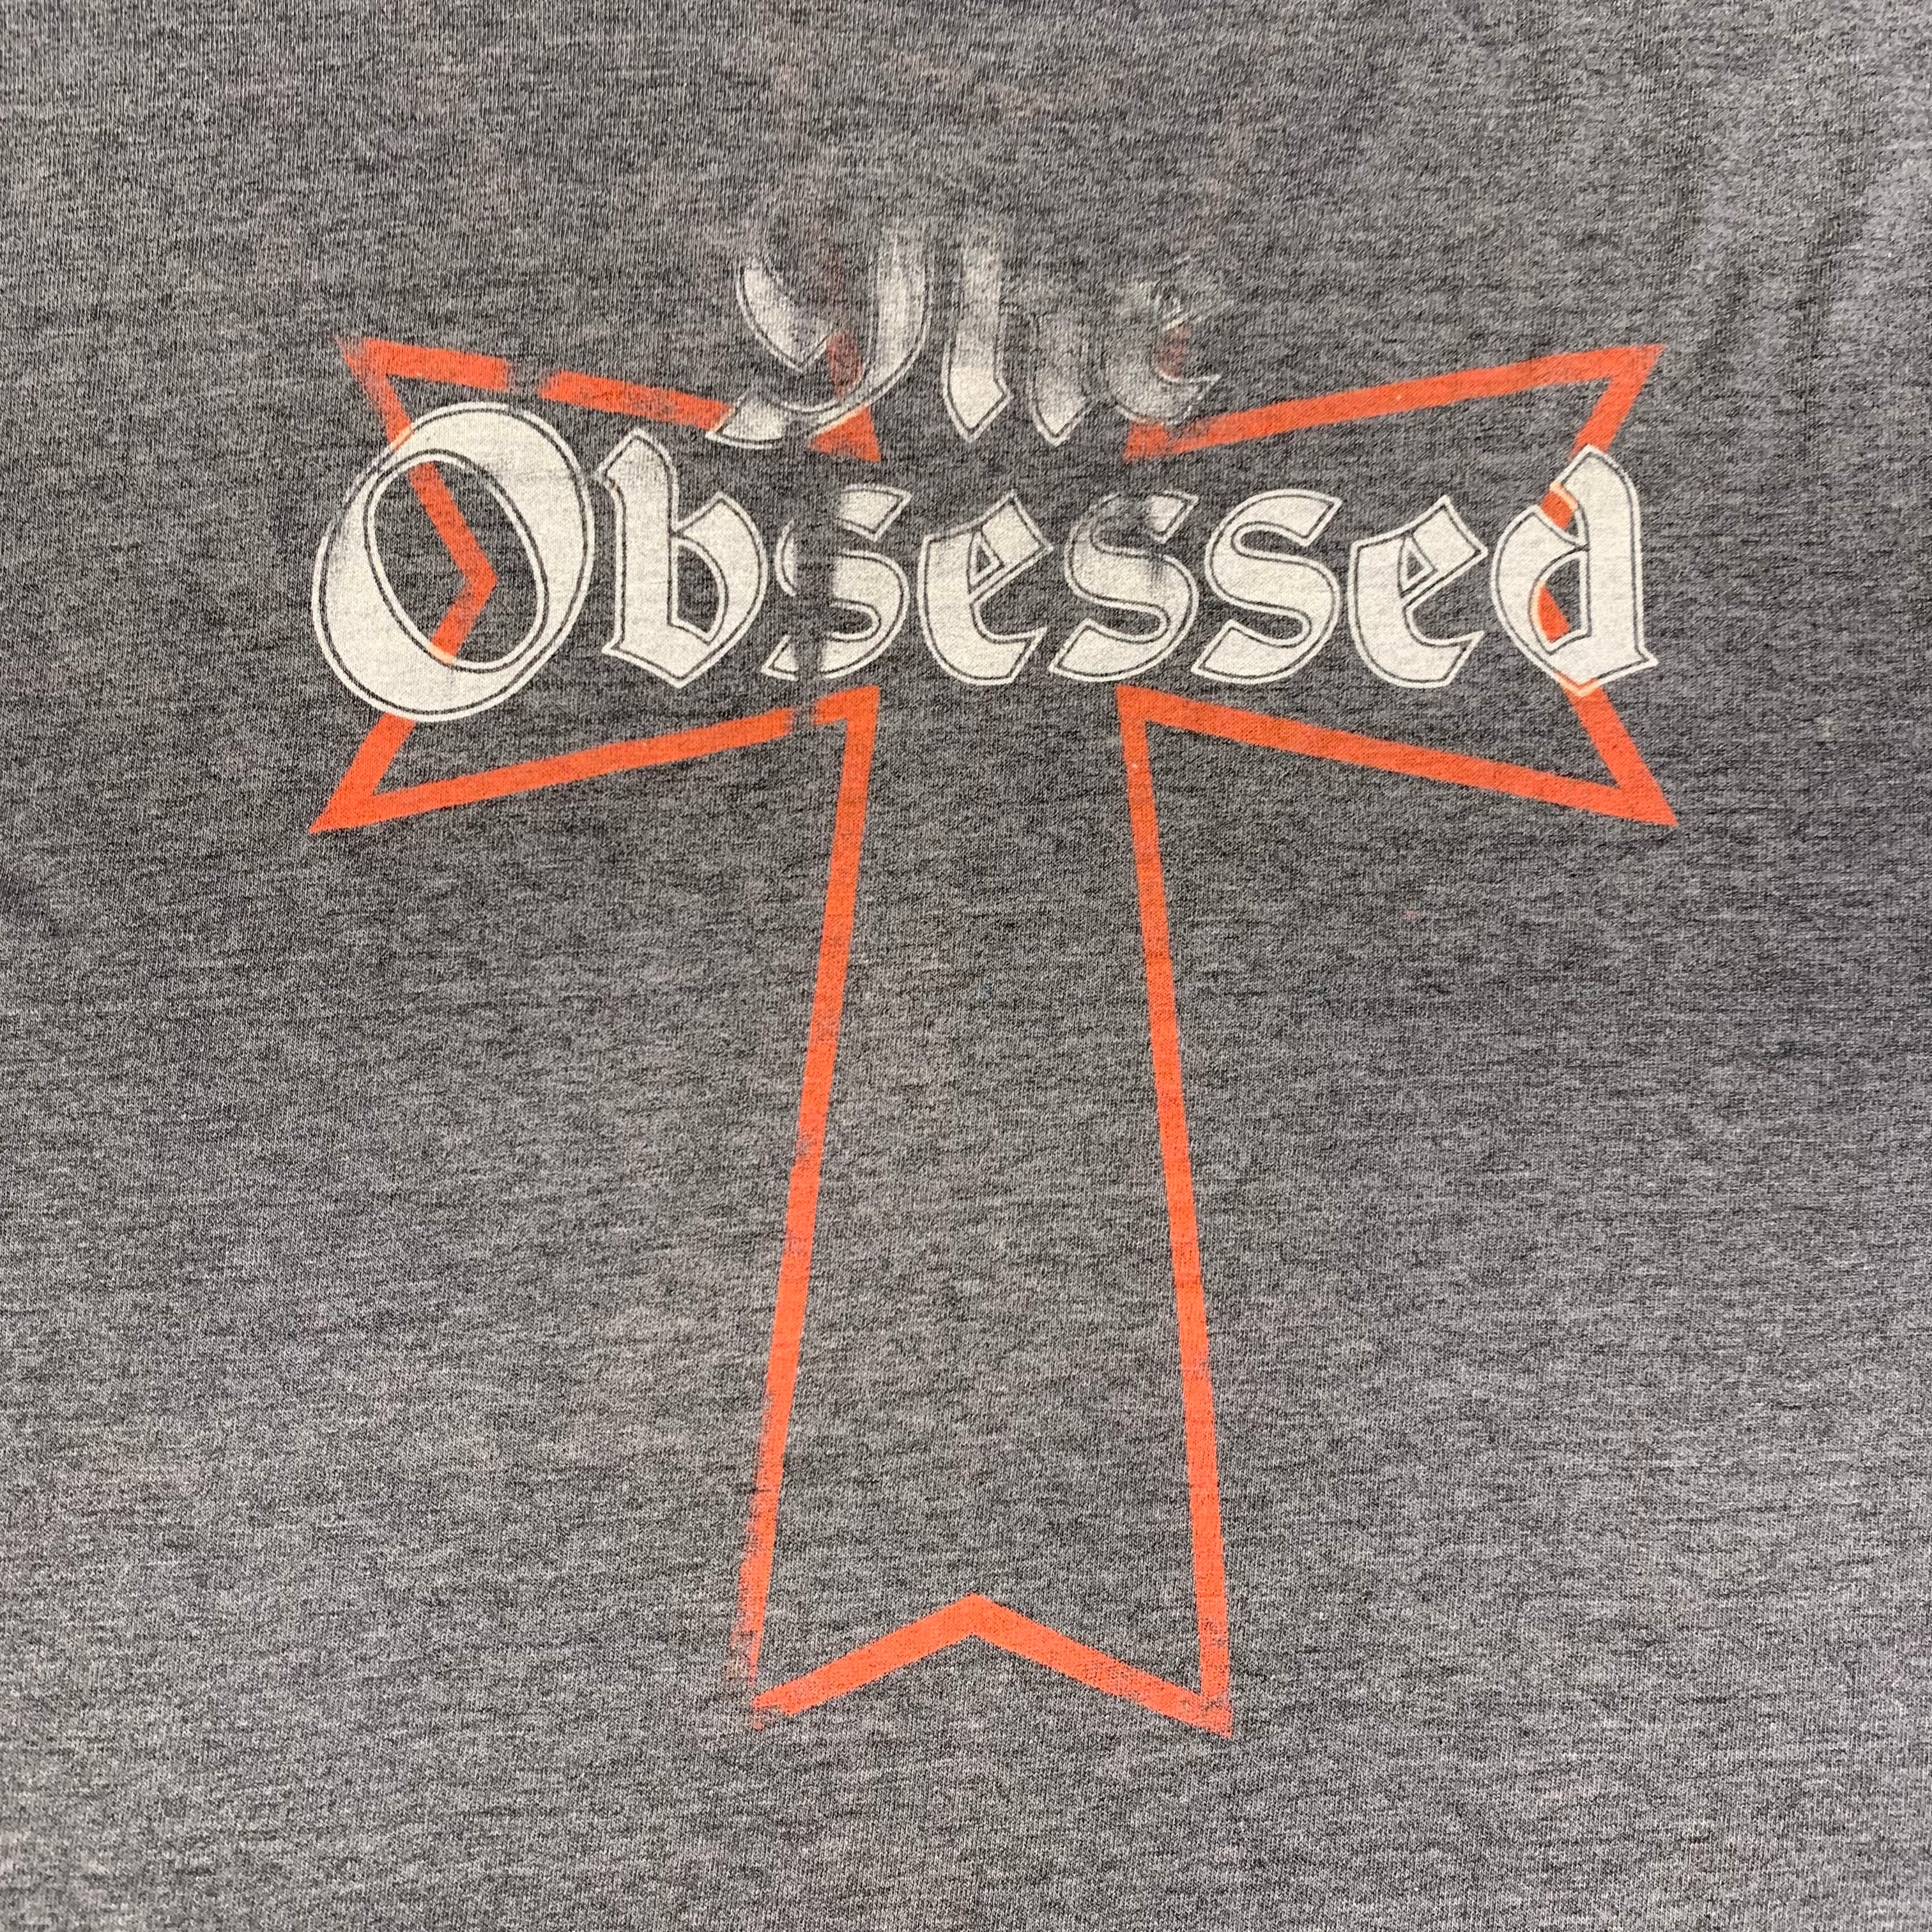 Pin on Obsessed.